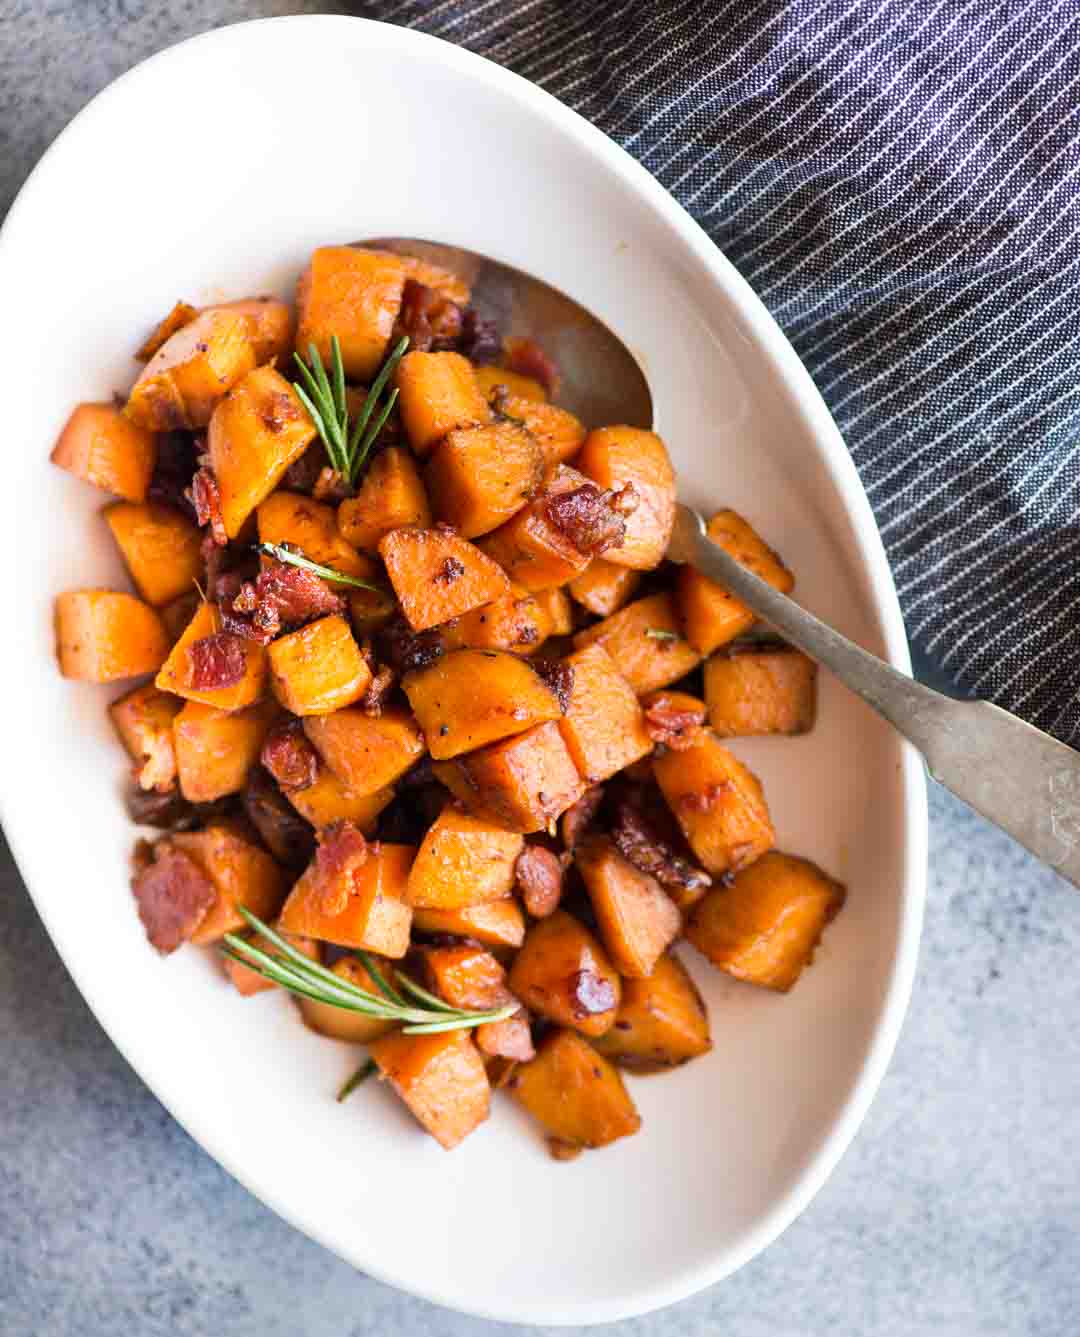 Maple Bacon Sweet Potato Hash with a hint of cinnamon and rosemary is easy to make. A perfect side dish to serve with your dinner or thanksgiving dinner.